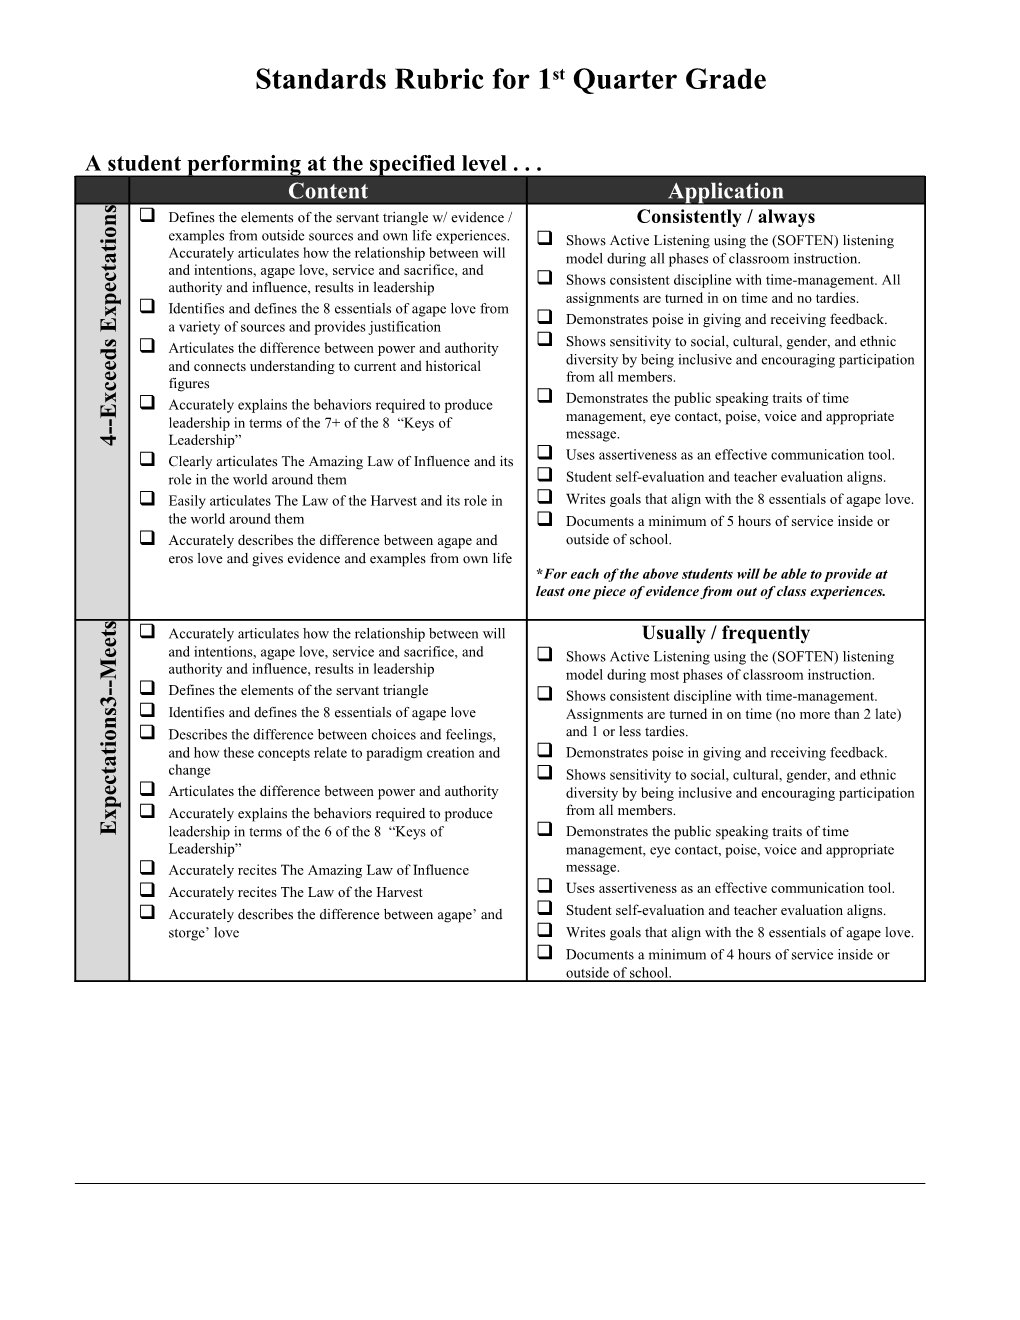 Standards Rubric for Final Course Grade